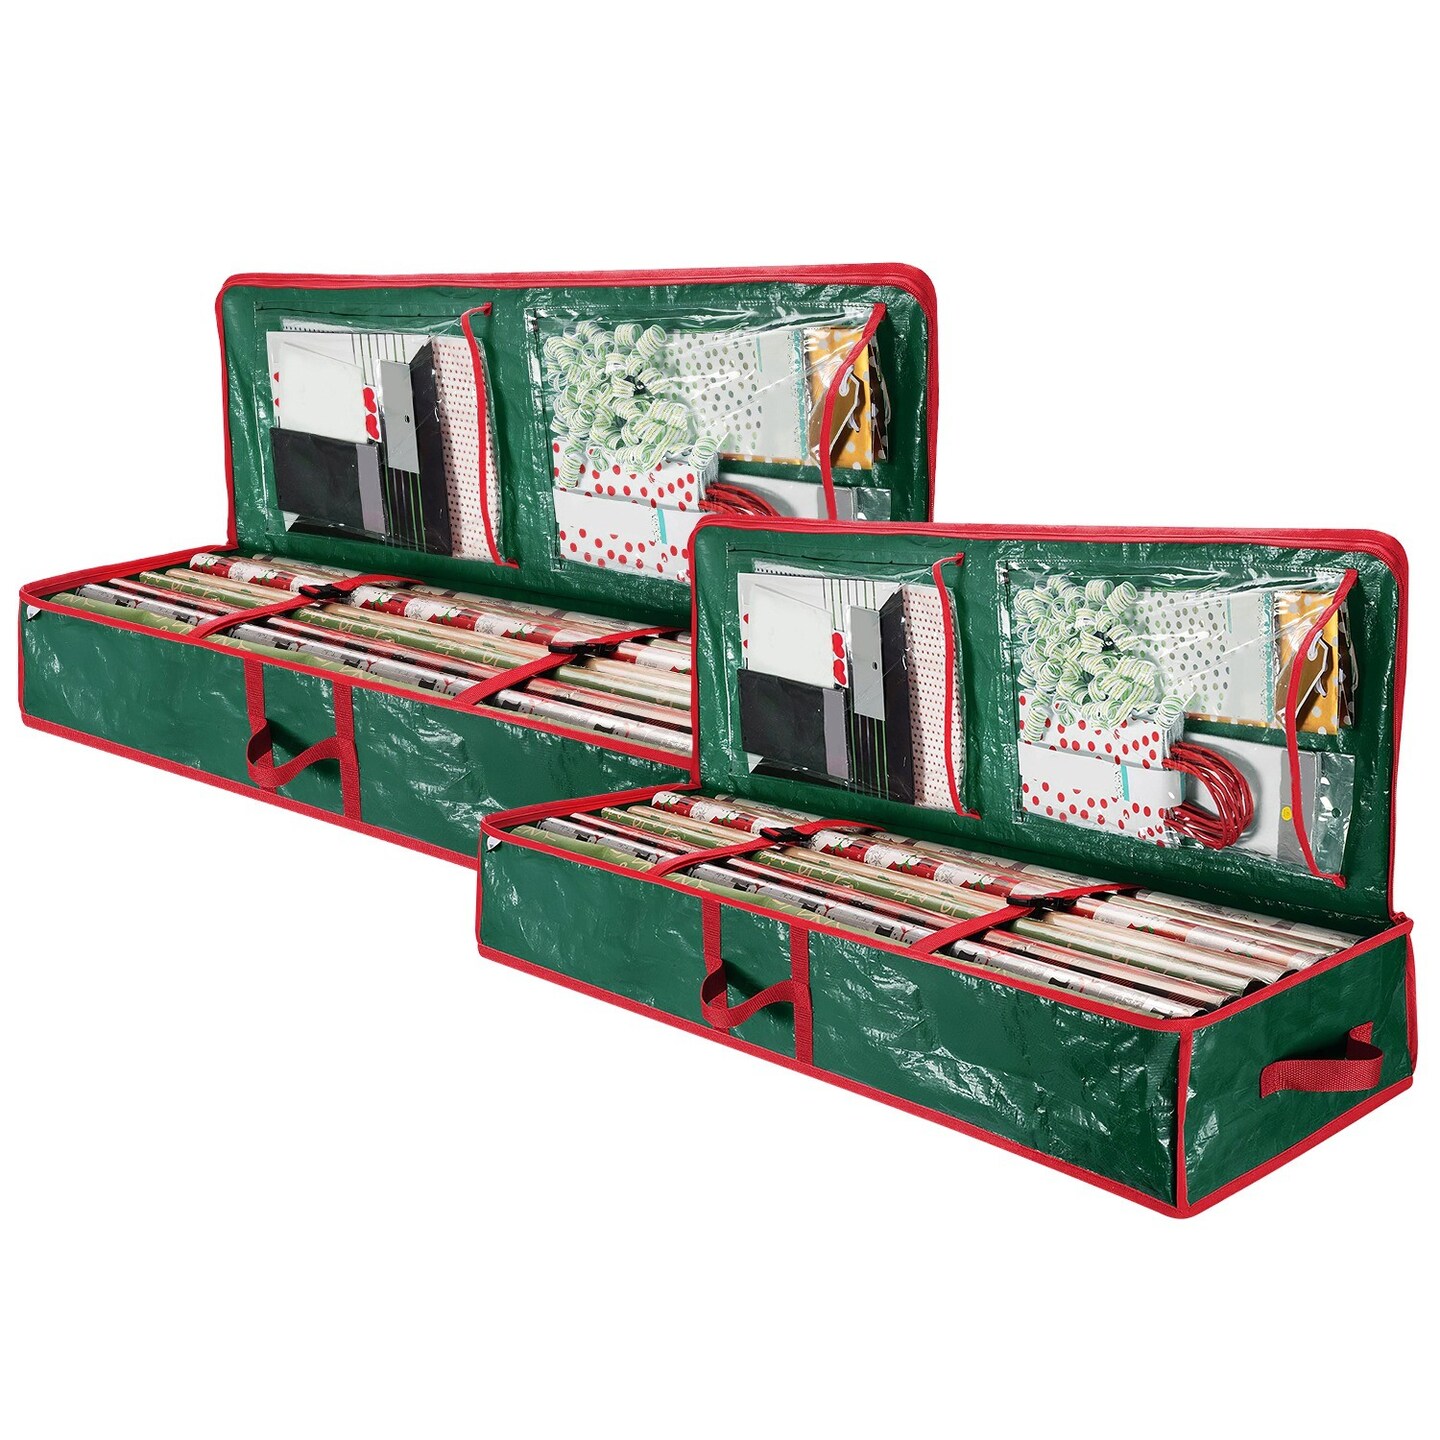 2Pcs Christmas Wrapping Paper Storage Containers Foldable Organizer with Pockets and Handles